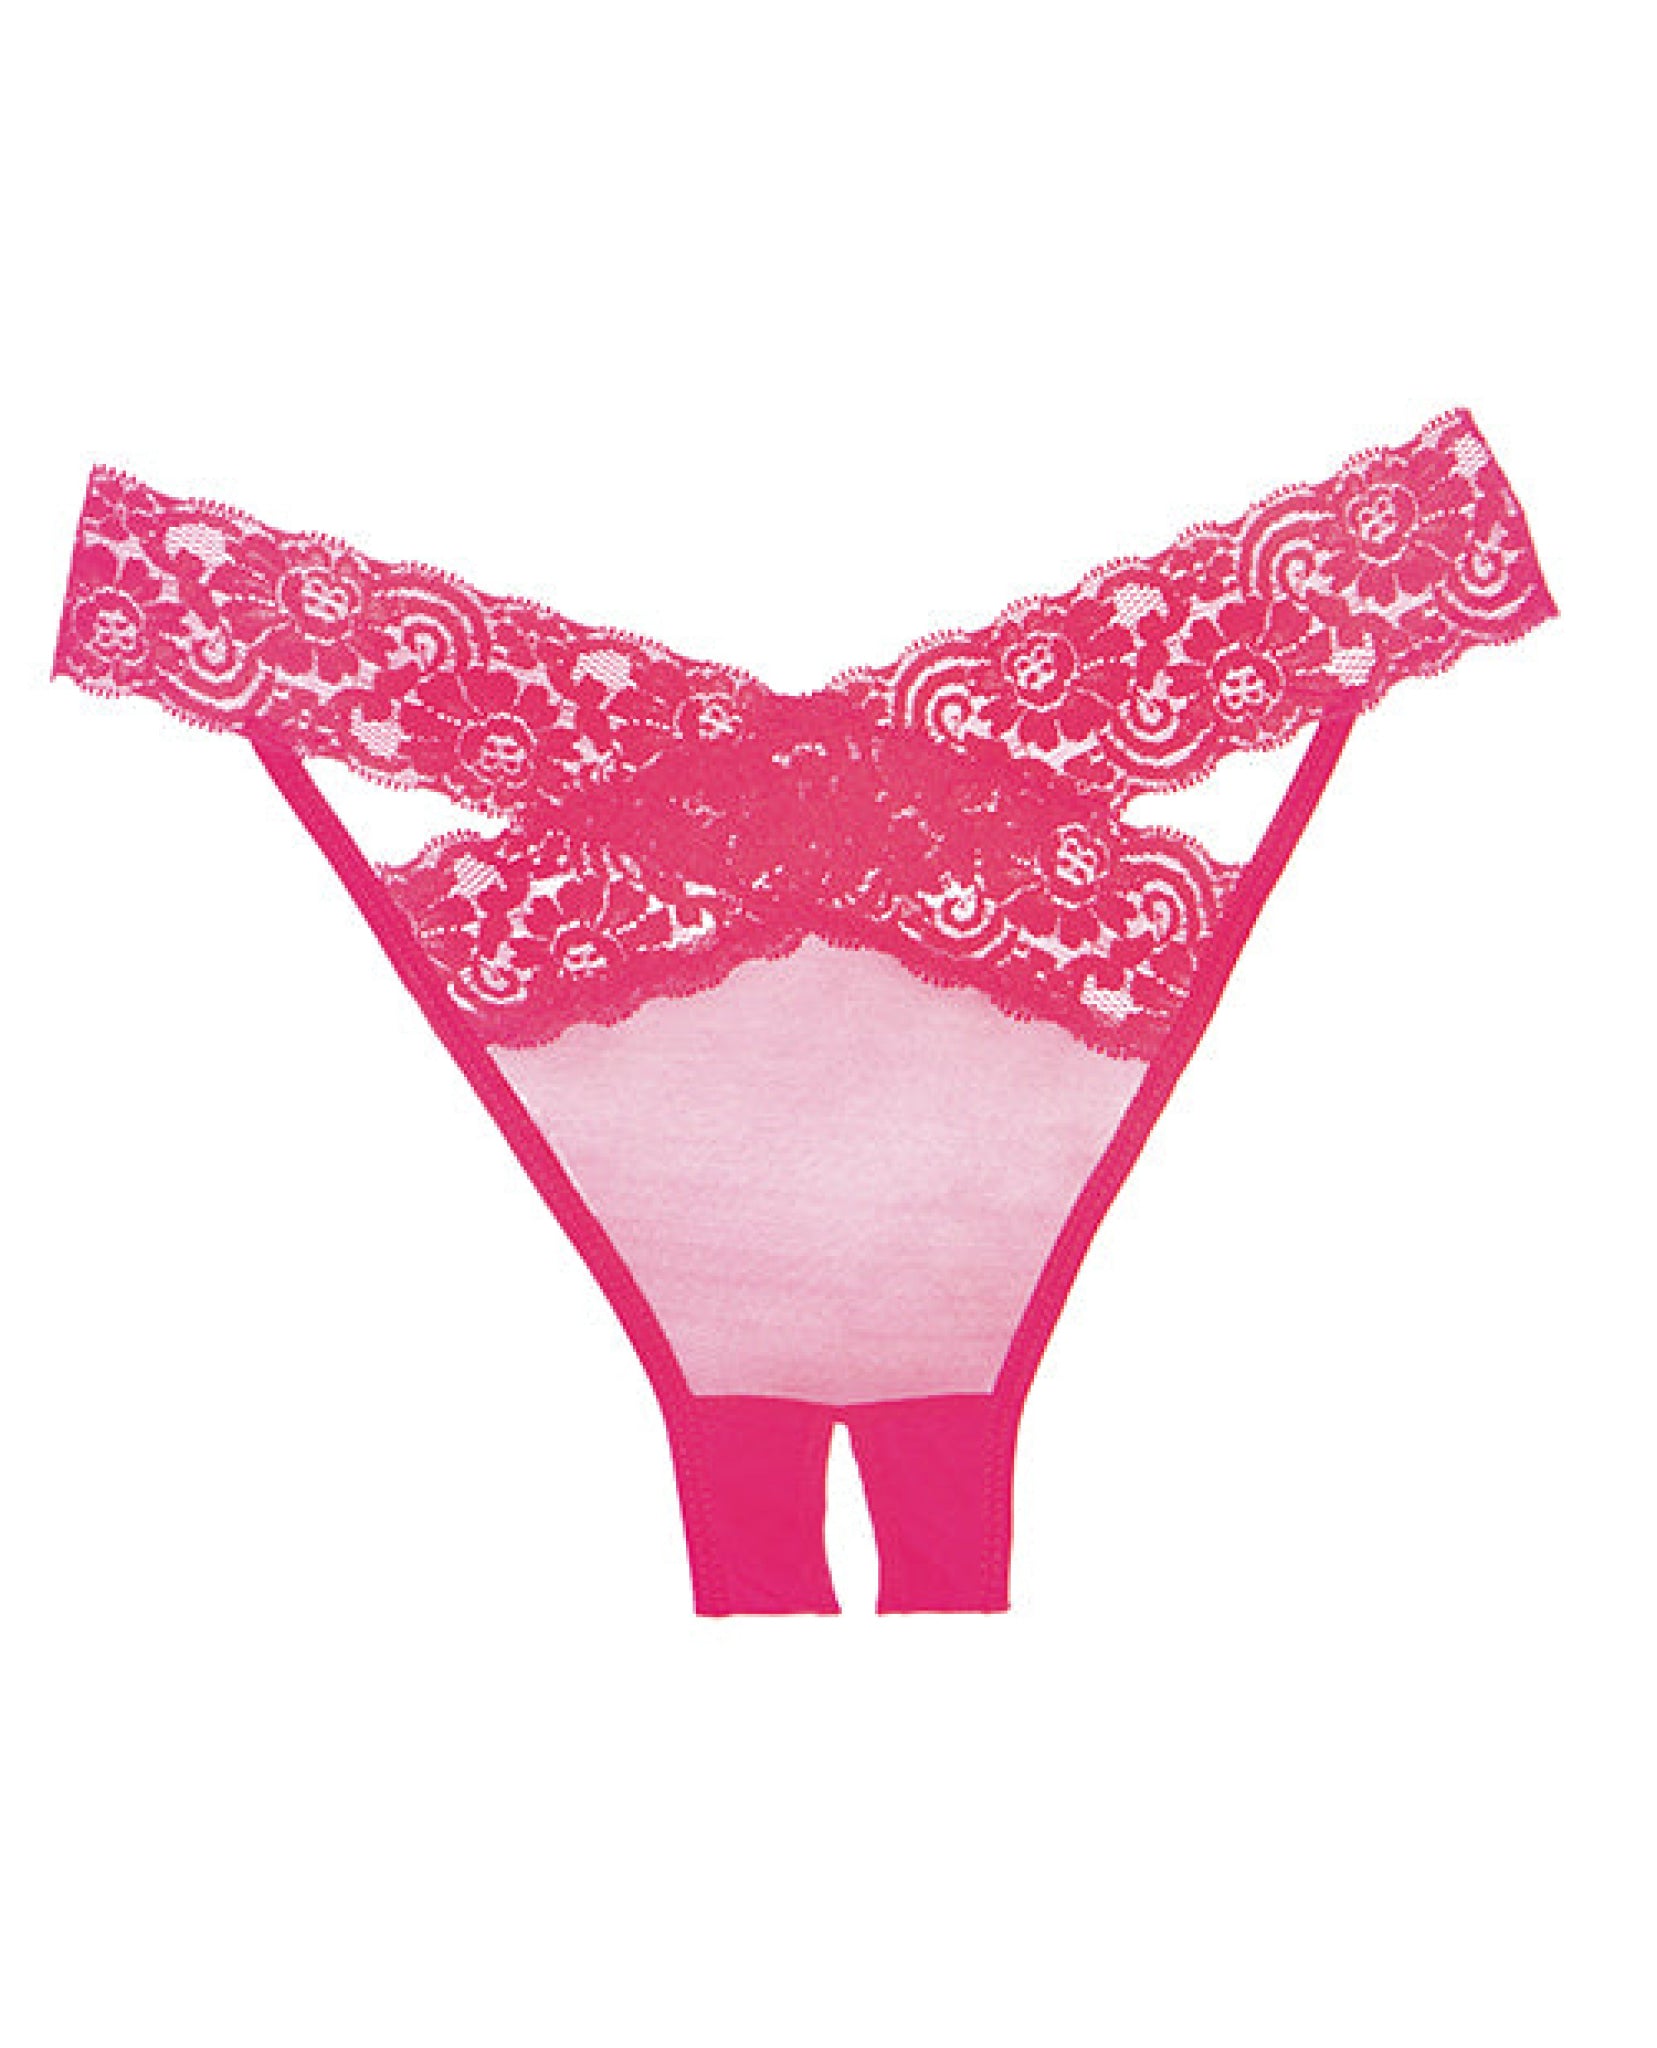 Adore Sheer & Lace Desire Panty O/s Allure